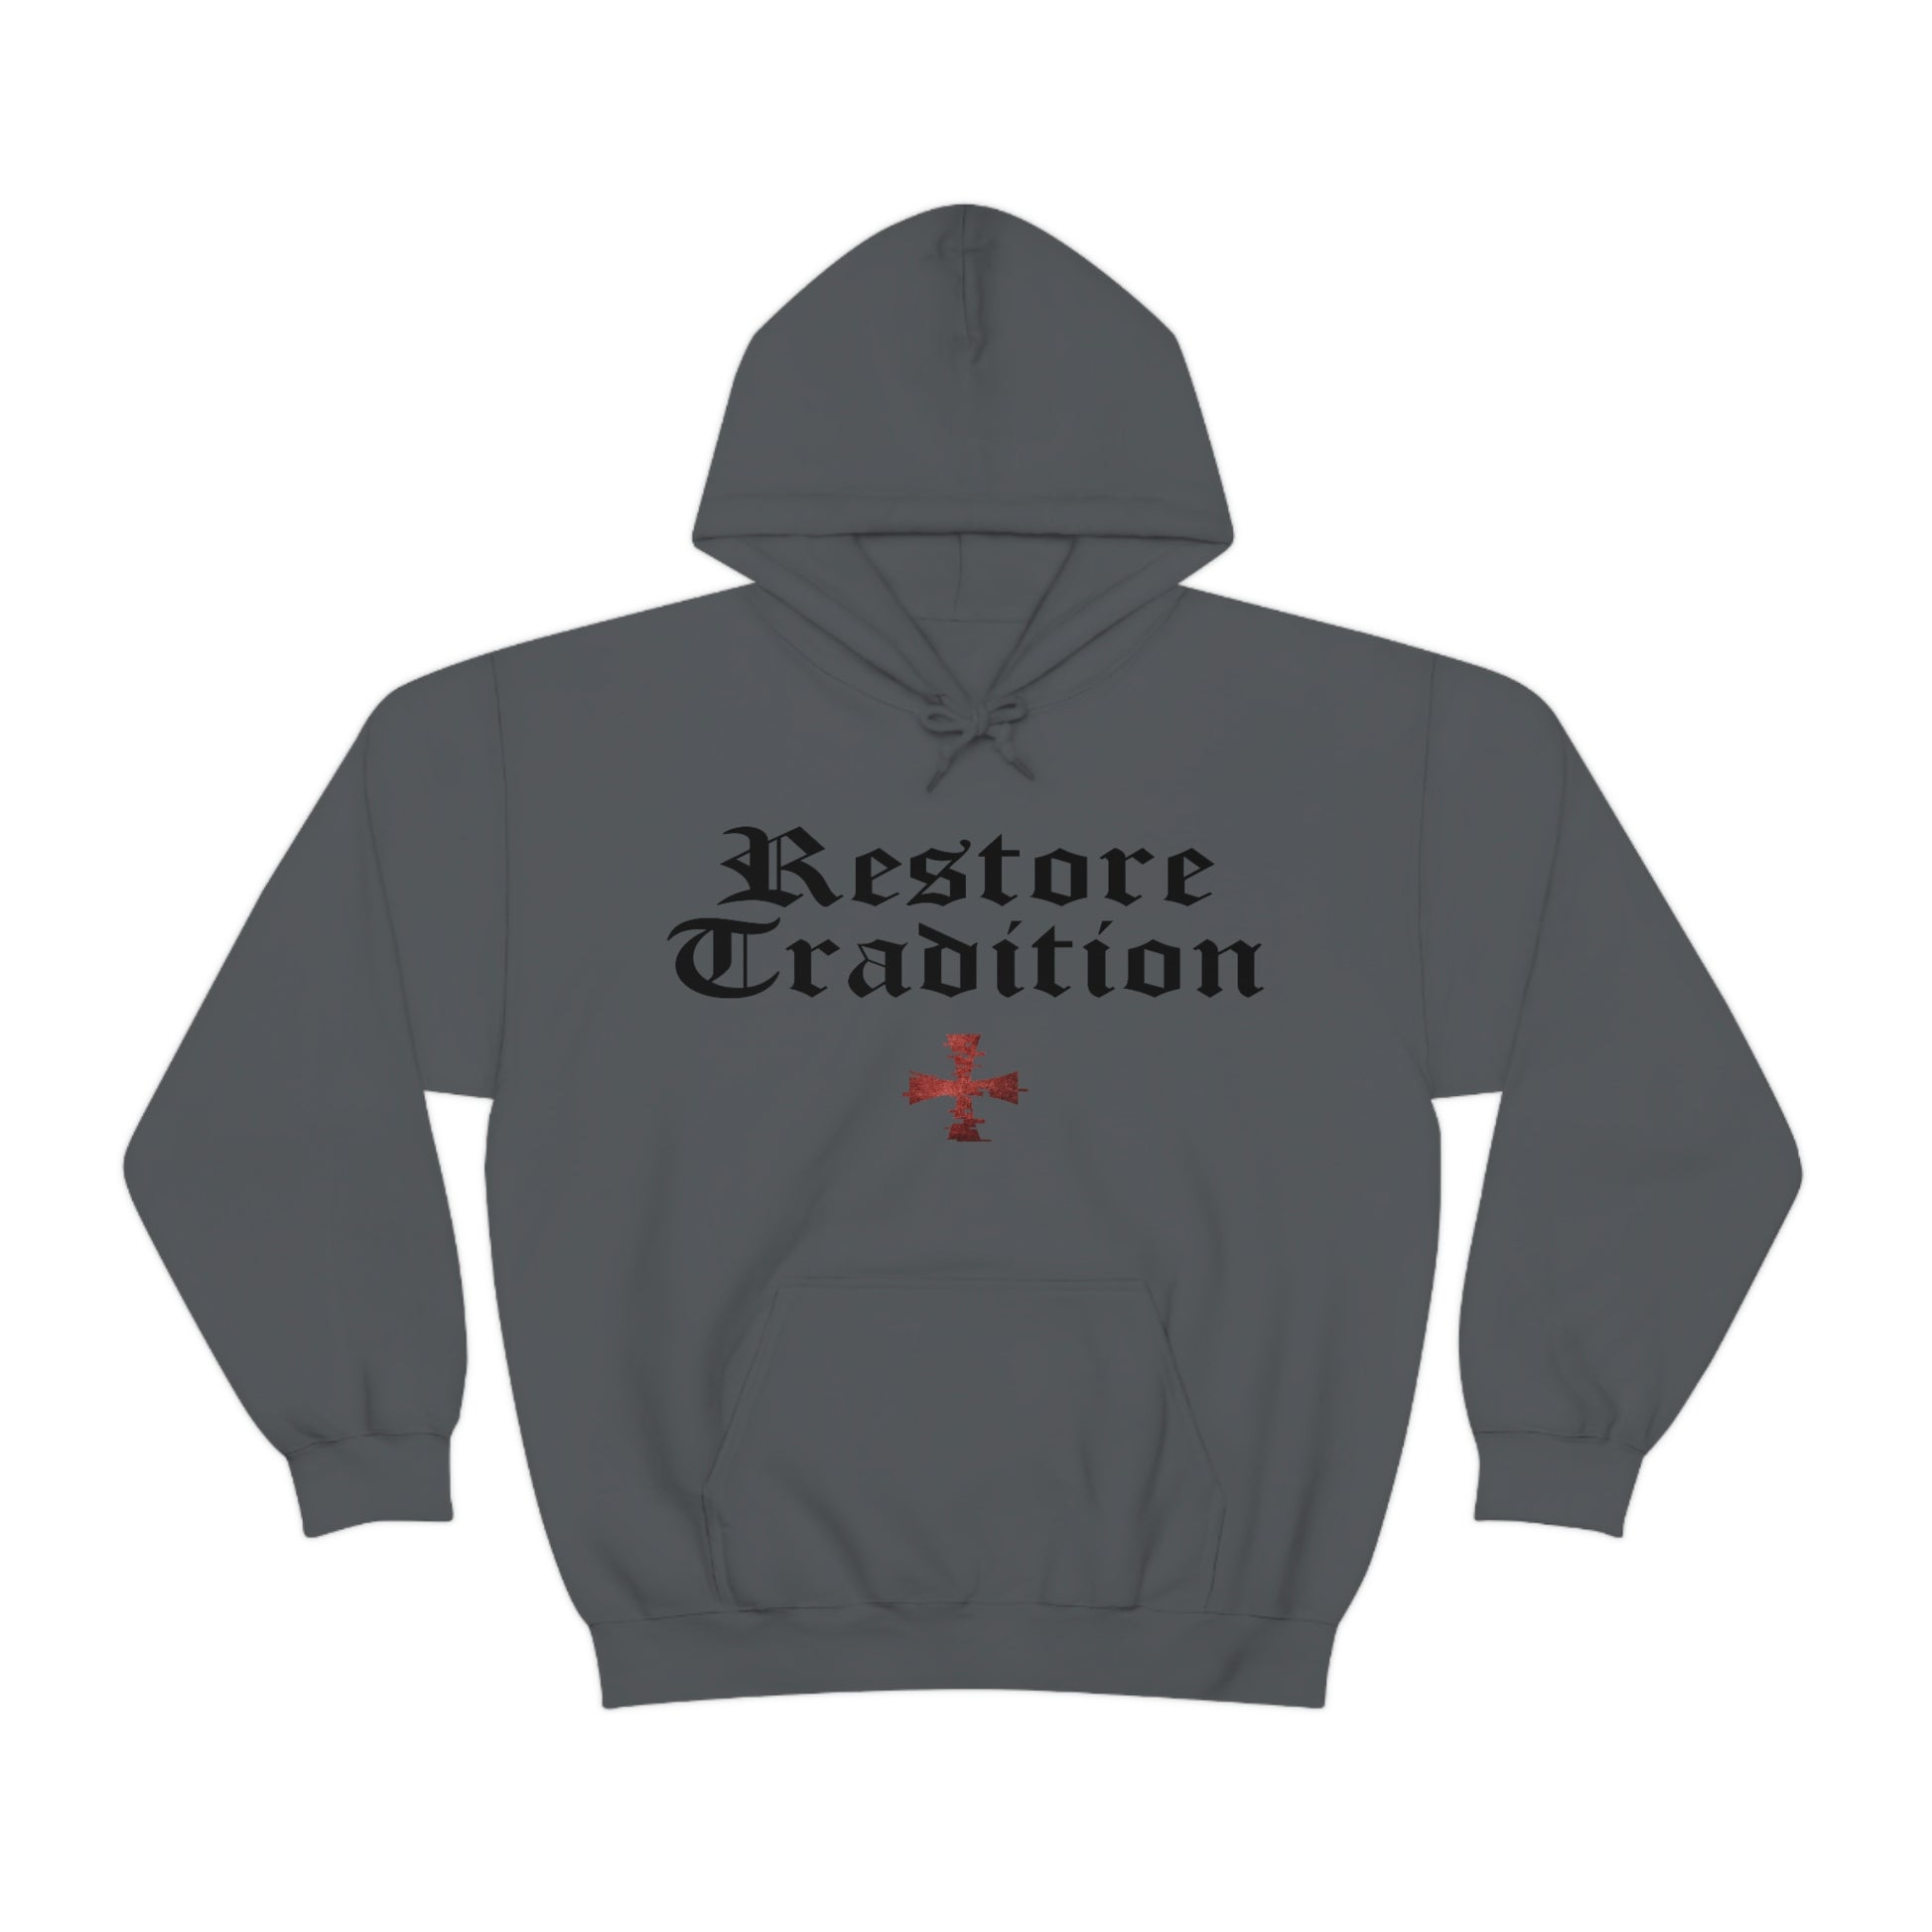 Charcoal Gray Gildan hoodie with "Restore Tradition" and a red digital crusader Sanctus Servo logo printed on it.